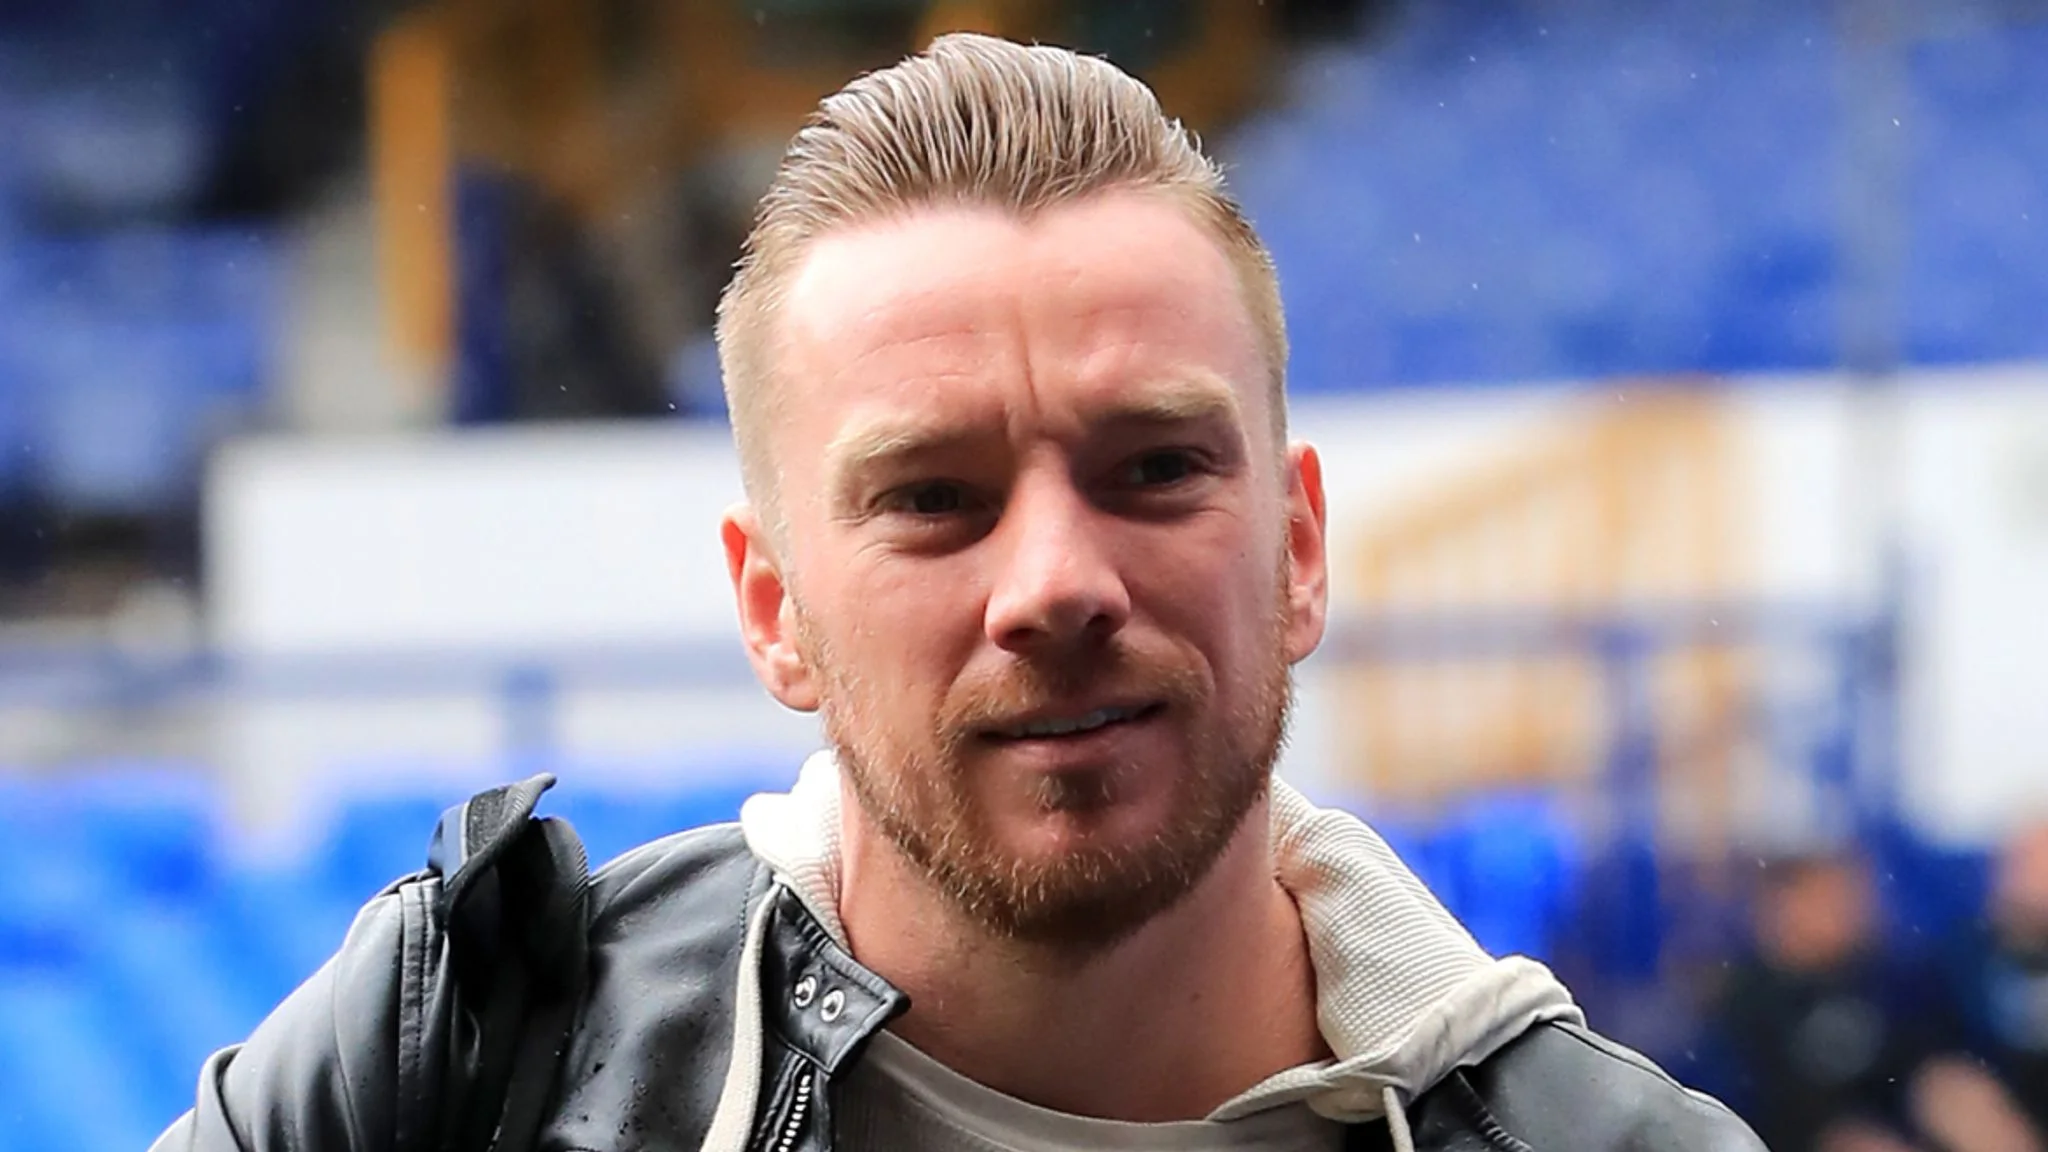 ‘LIKE A NEW SIGNING’: JAMIE O’HARA SAYS PEOPLE HAVE ‘FORGOTTEN’ HOW GOOD £25M TOTTENHAM STAR IS